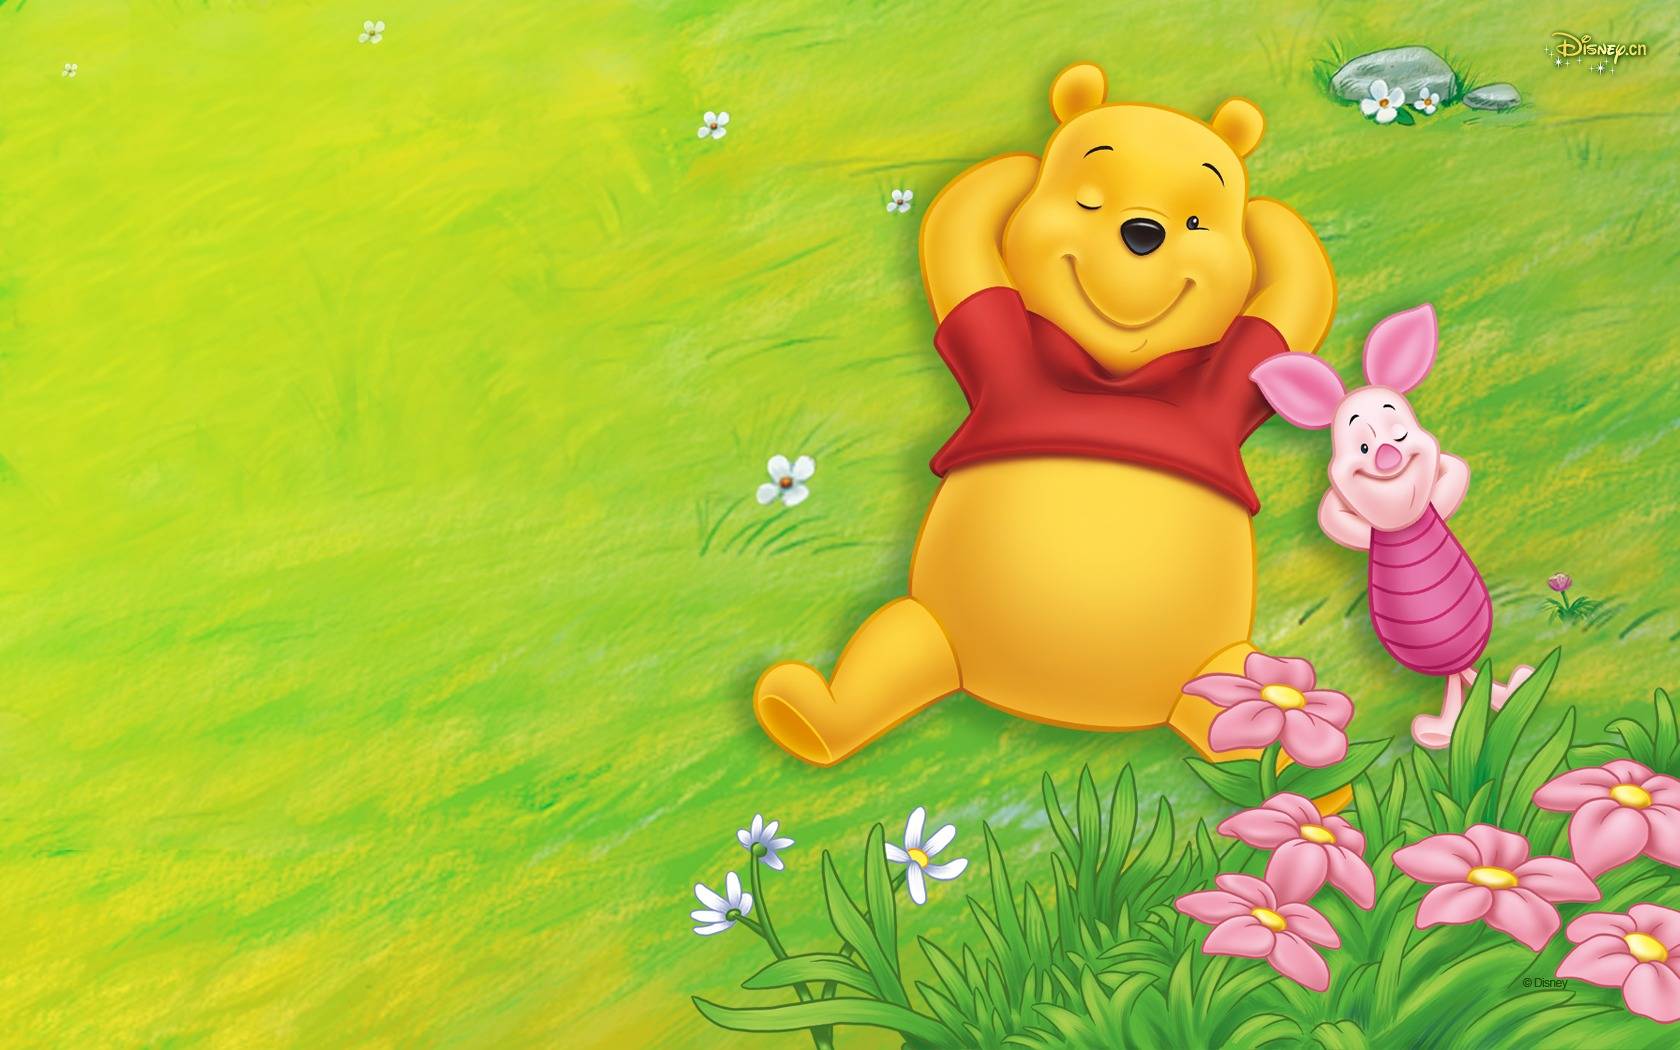 Just relaxing or   Winnie The Pooh Wallpaper